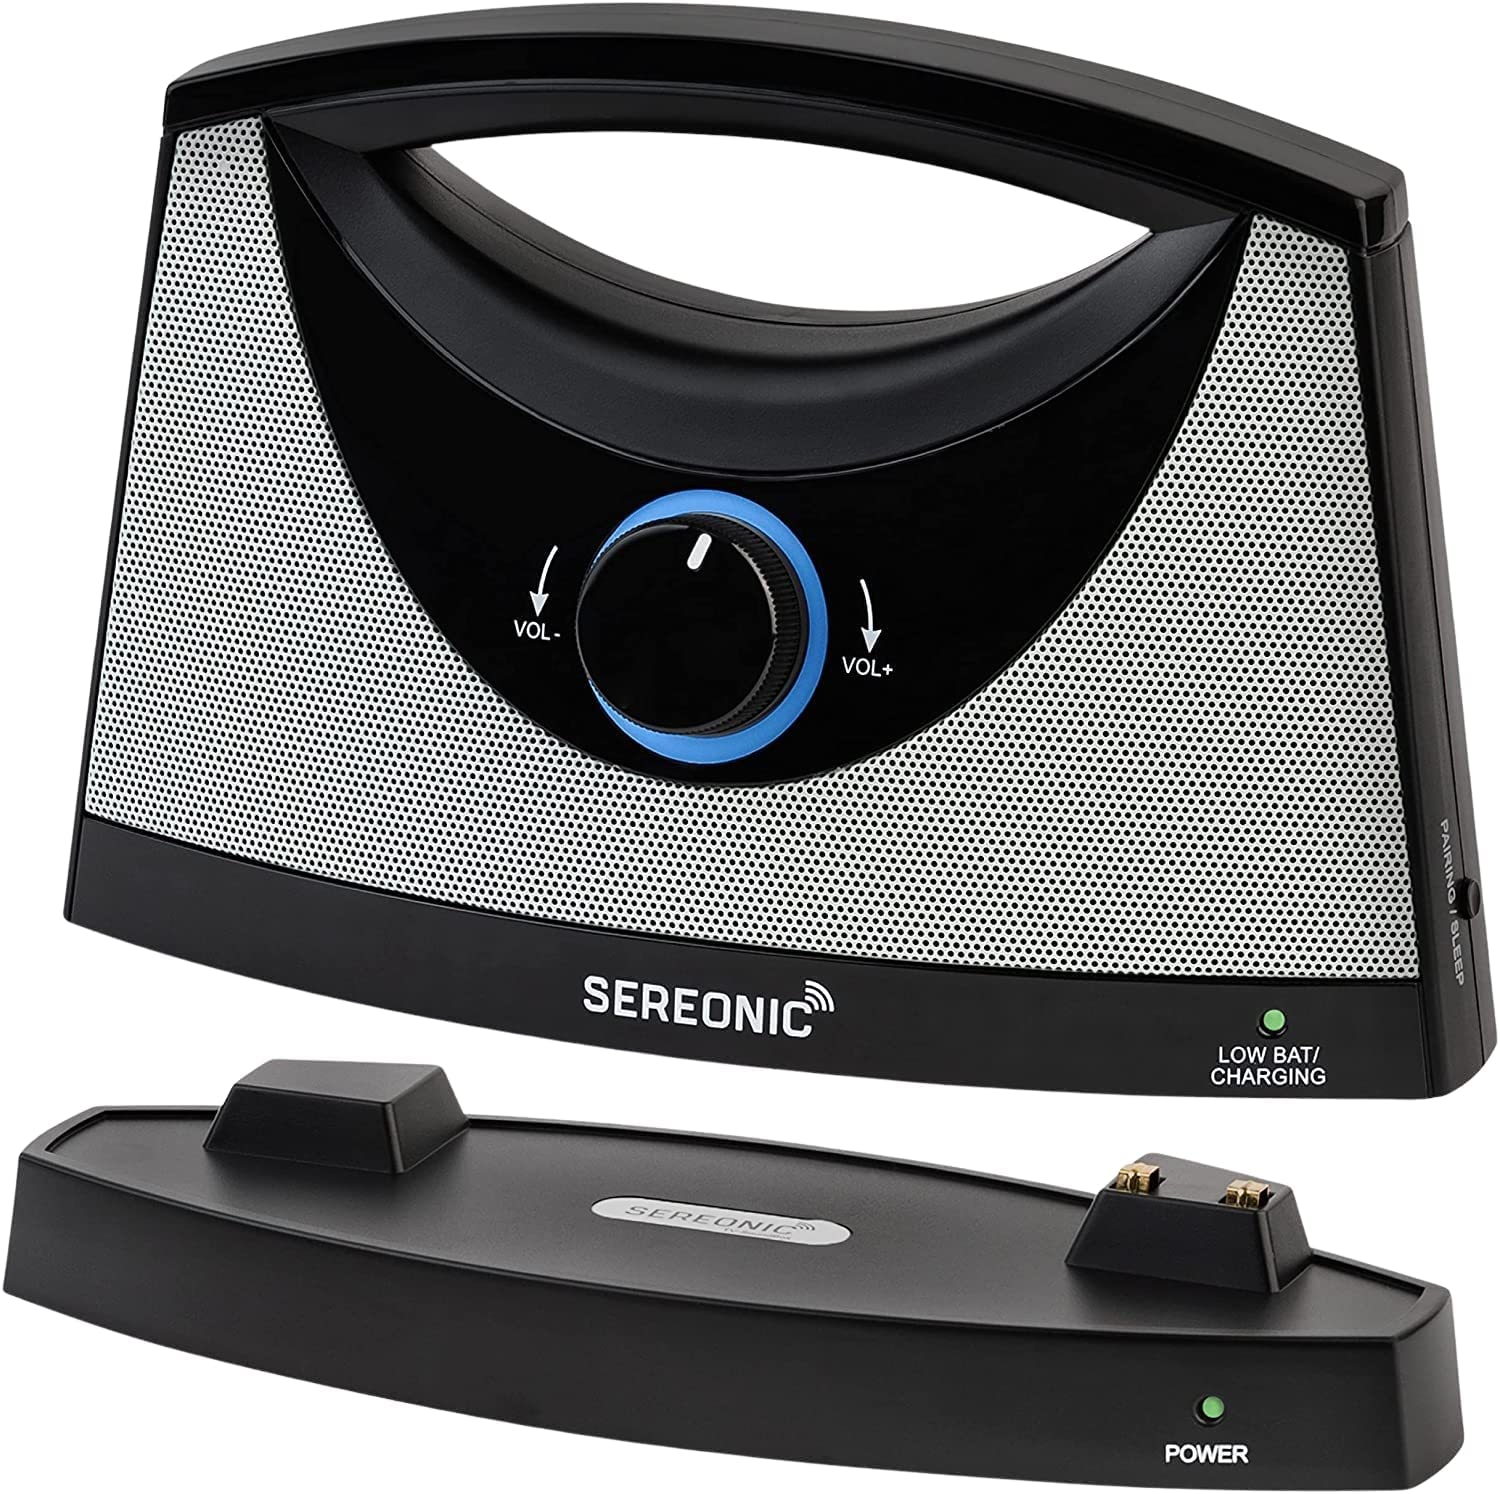 Sereonic Wireless TV Speaker System Deluxe (2 AC Adapters) | Portable Personal Soundbar Sound Box for Hard of Hearing, Seniors | No Headphones Needed! - image 4 of 6